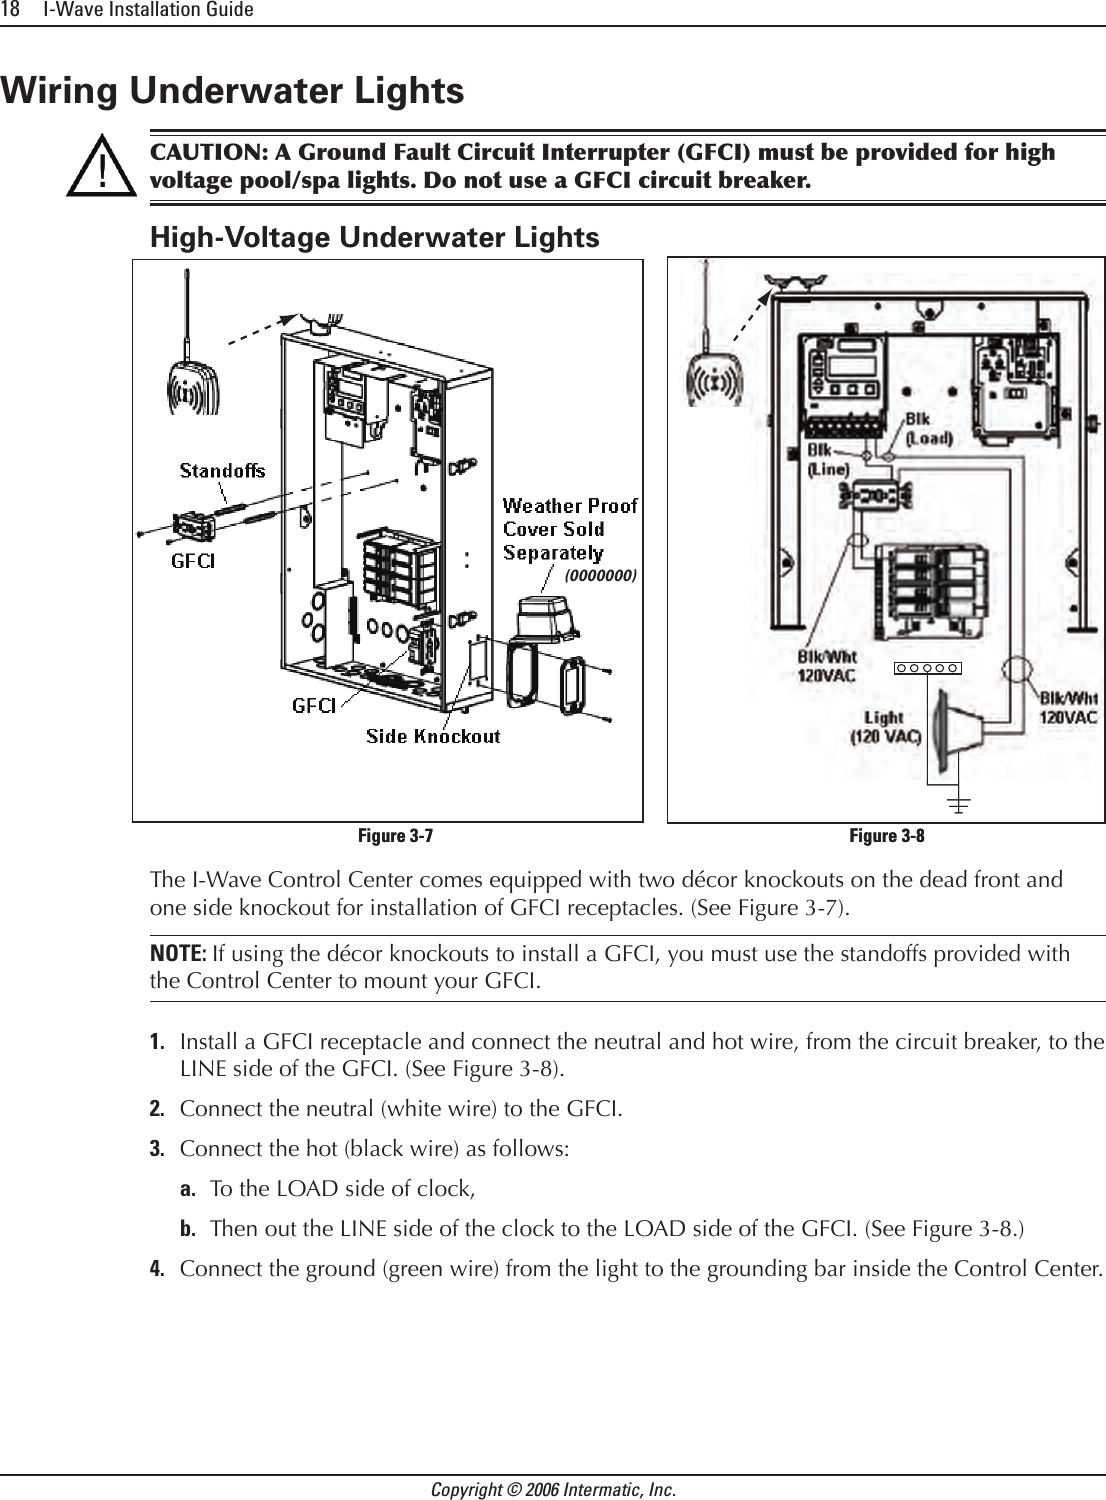 18     I-Wave Installation GuideCopyright © 2006 Intermatic, Inc.Wiring Underwater LightsCAUTION: A Ground Fault Circuit Interrupter (GFCI) must be provided for high voltage pool/spa lights. Do not use a GFCI circuit breaker.High-Voltage Underwater LightsThe I-Wave Control Center comes equipped with two décor knockouts on the dead front and one side knockout for installation of GFCI receptacles. (See Figure 3-7).NOTE: If using the décor knockouts to install a GFCI, you must use the standoffs provided with the Control Center to mount your GFCI.Install a GFCI receptacle and connect the neutral and hot wire, from the circuit breaker, to the LINE side of the GFCI. (See Figure 3-8).Connect the neutral (white wire) to the GFCI.Connect the hot (black wire) as follows:To the LOAD side of clock, Then out the LINE side of the clock to the LOAD side of the GFCI. (See Figure 3-8.)Connect the ground (green wire) from the light to the grounding bar inside the Control Center.1.2.3.a.b.4.(0000000)(0000000)      Figure 3-7                                    Figure 3-8      Figure 3-7                                    Figure 3-8